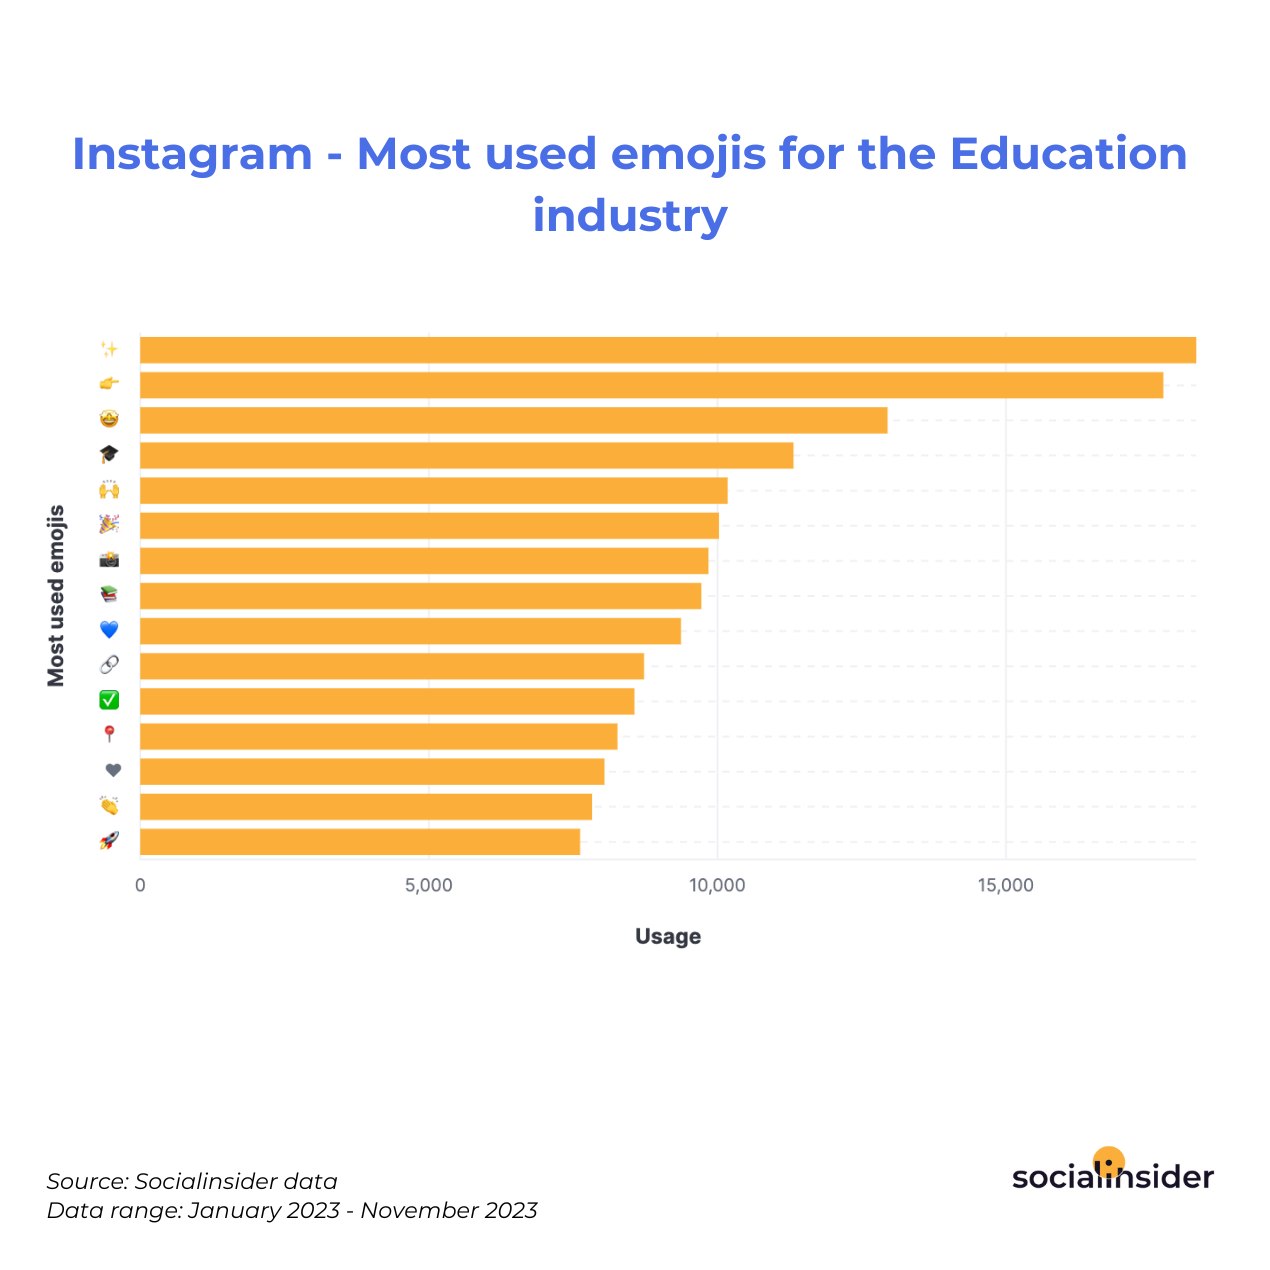 Instagram - Most used emojis for the Education industry